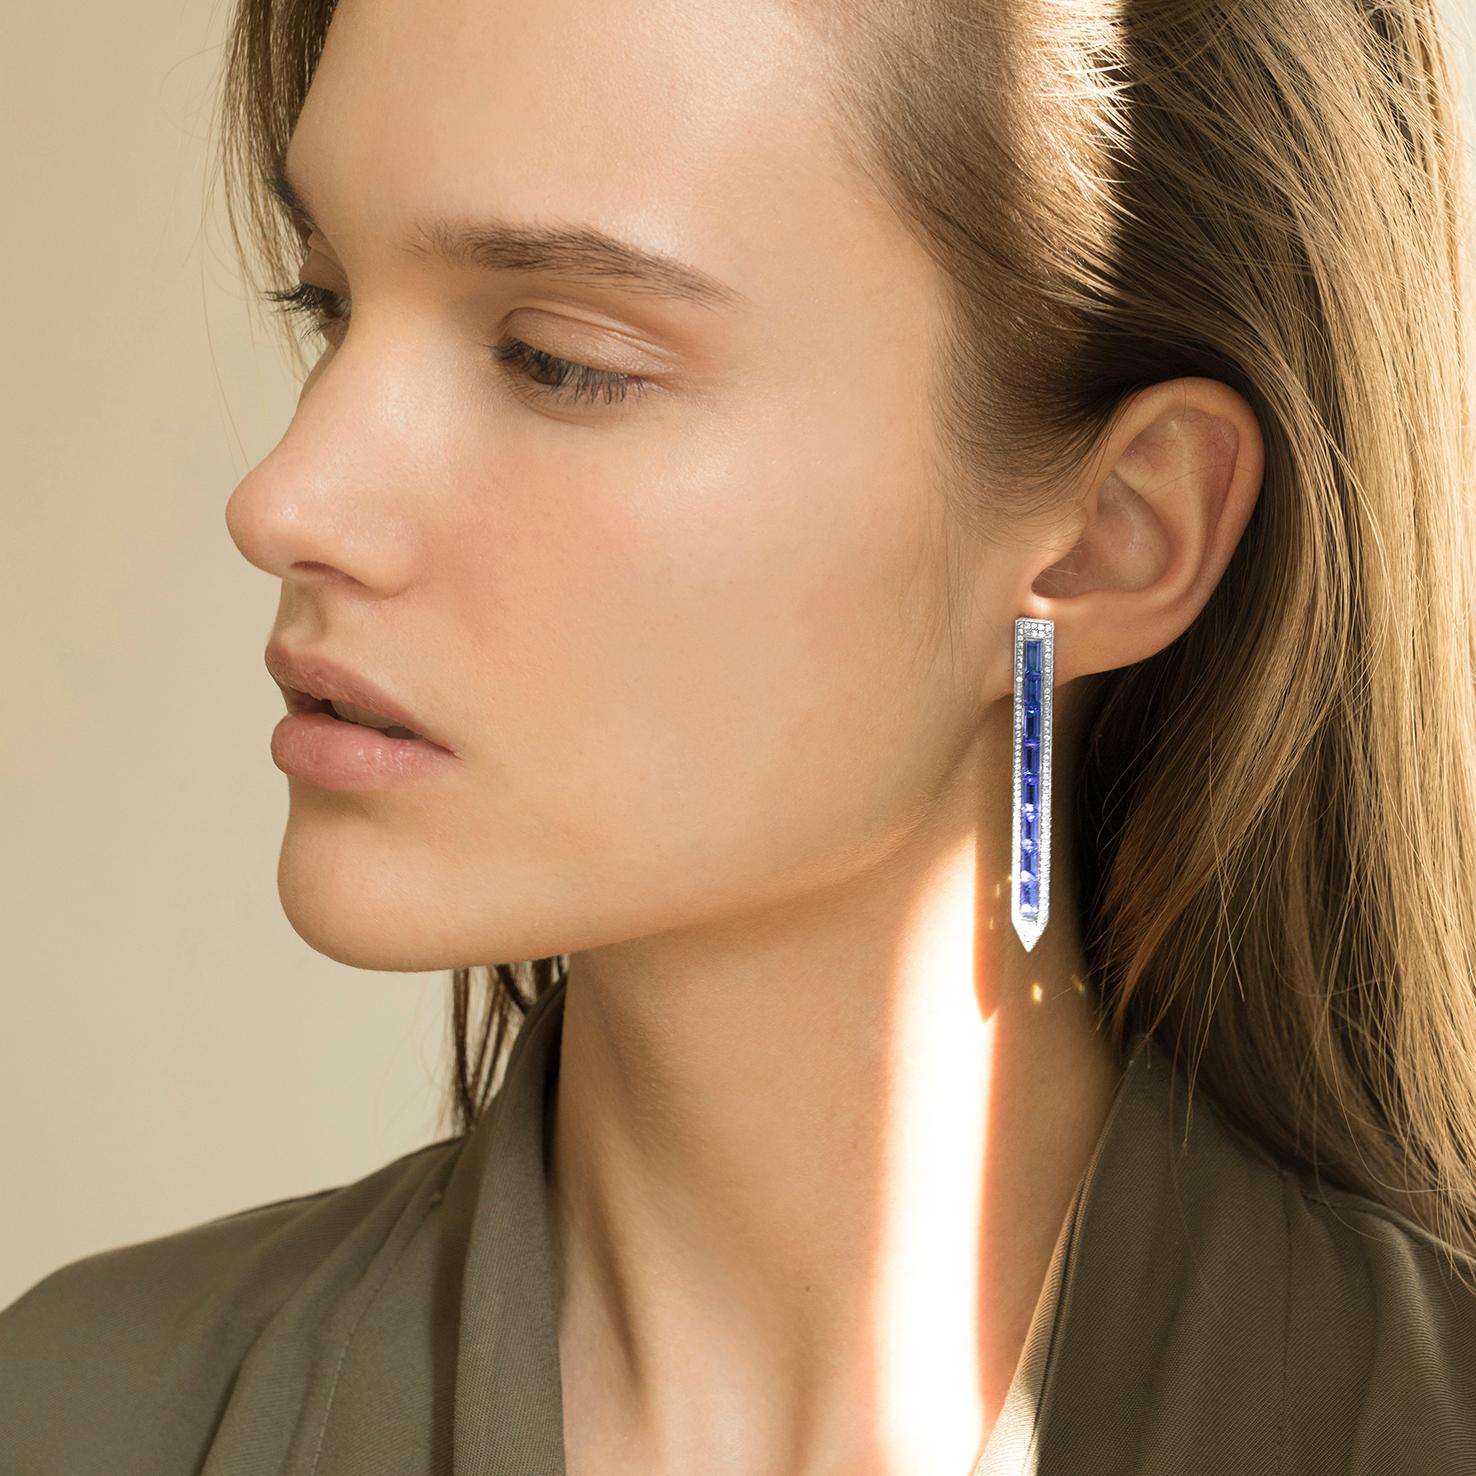 18kt white gold earrings with diamonds and iolite baguettes from Ralph Masri's Sacred Windows collection, inspired by the stained glass artwork of cathedrals and churches.

Available in yellow, rose or white gold.

Push backs for pierced ears.